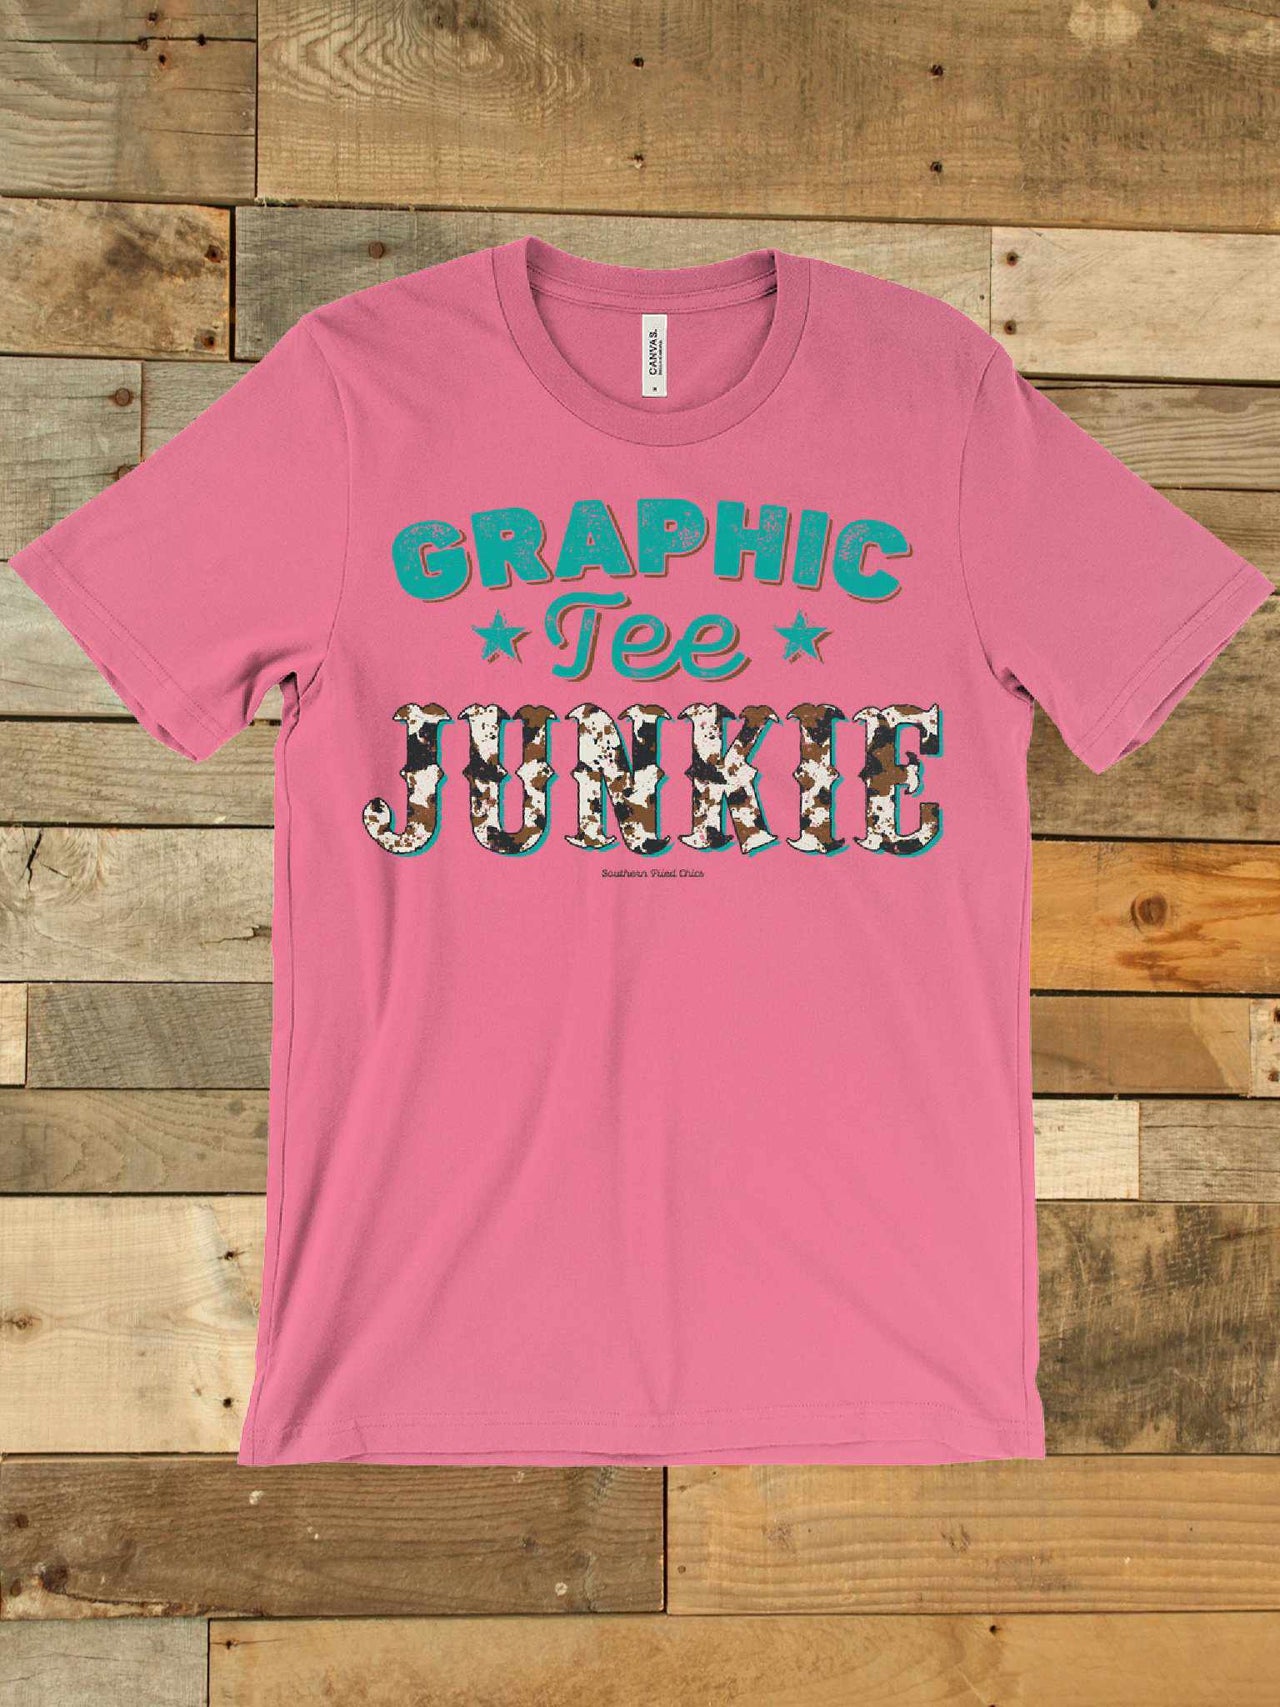 Graphic Tee Junkie Tee-Southern Fried Chics